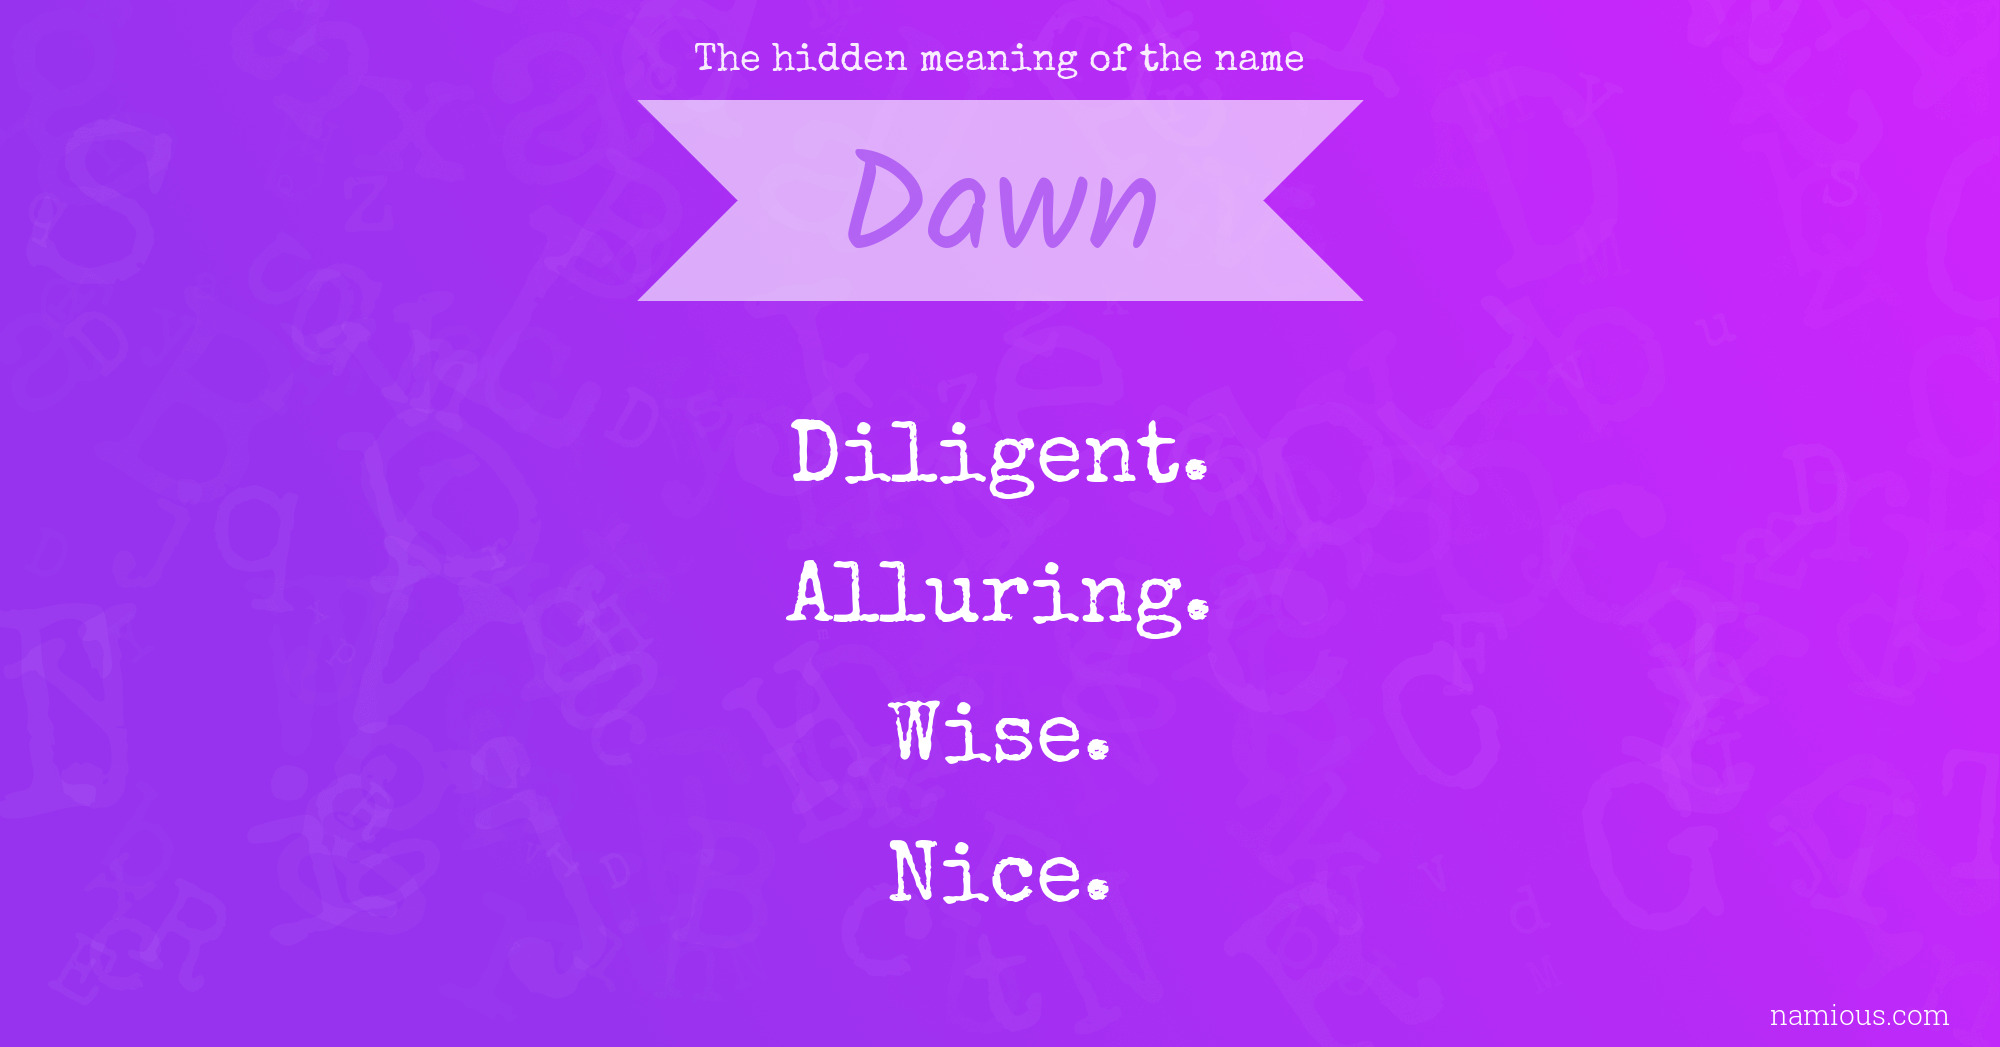 The hidden meaning of the name Dawn